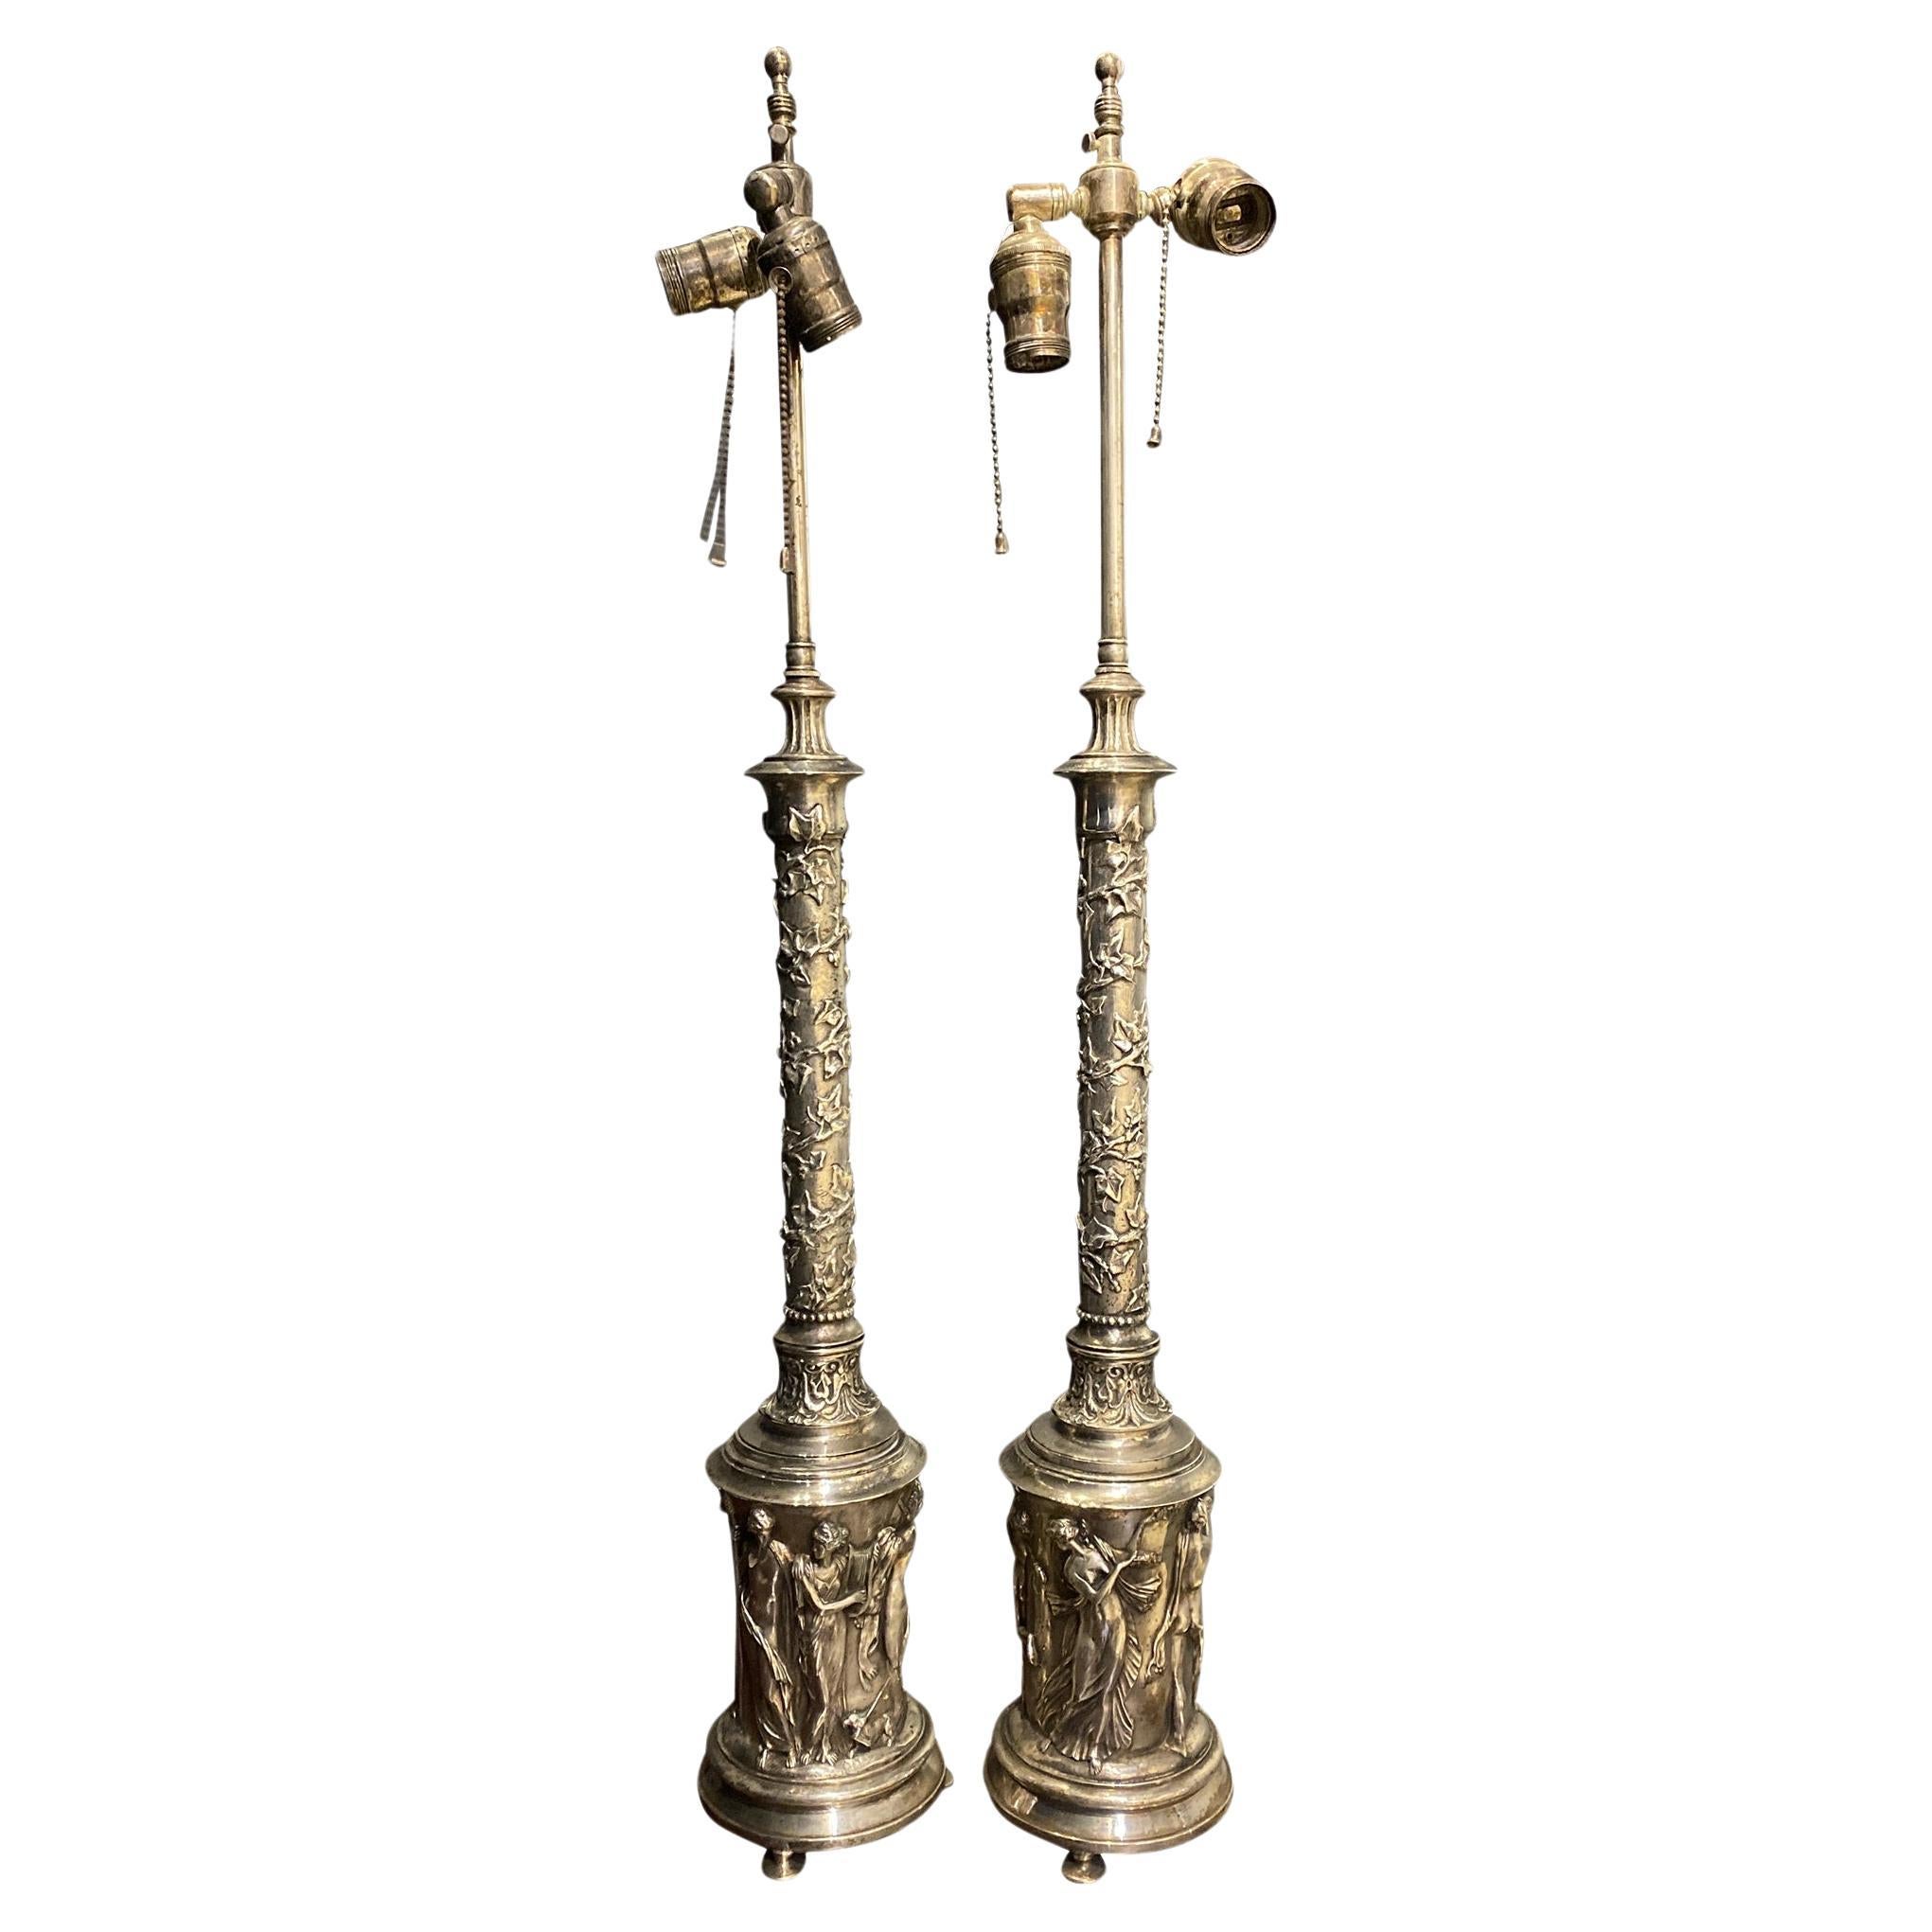 1920's Neoclassic Caldwell Silver Table Lamps